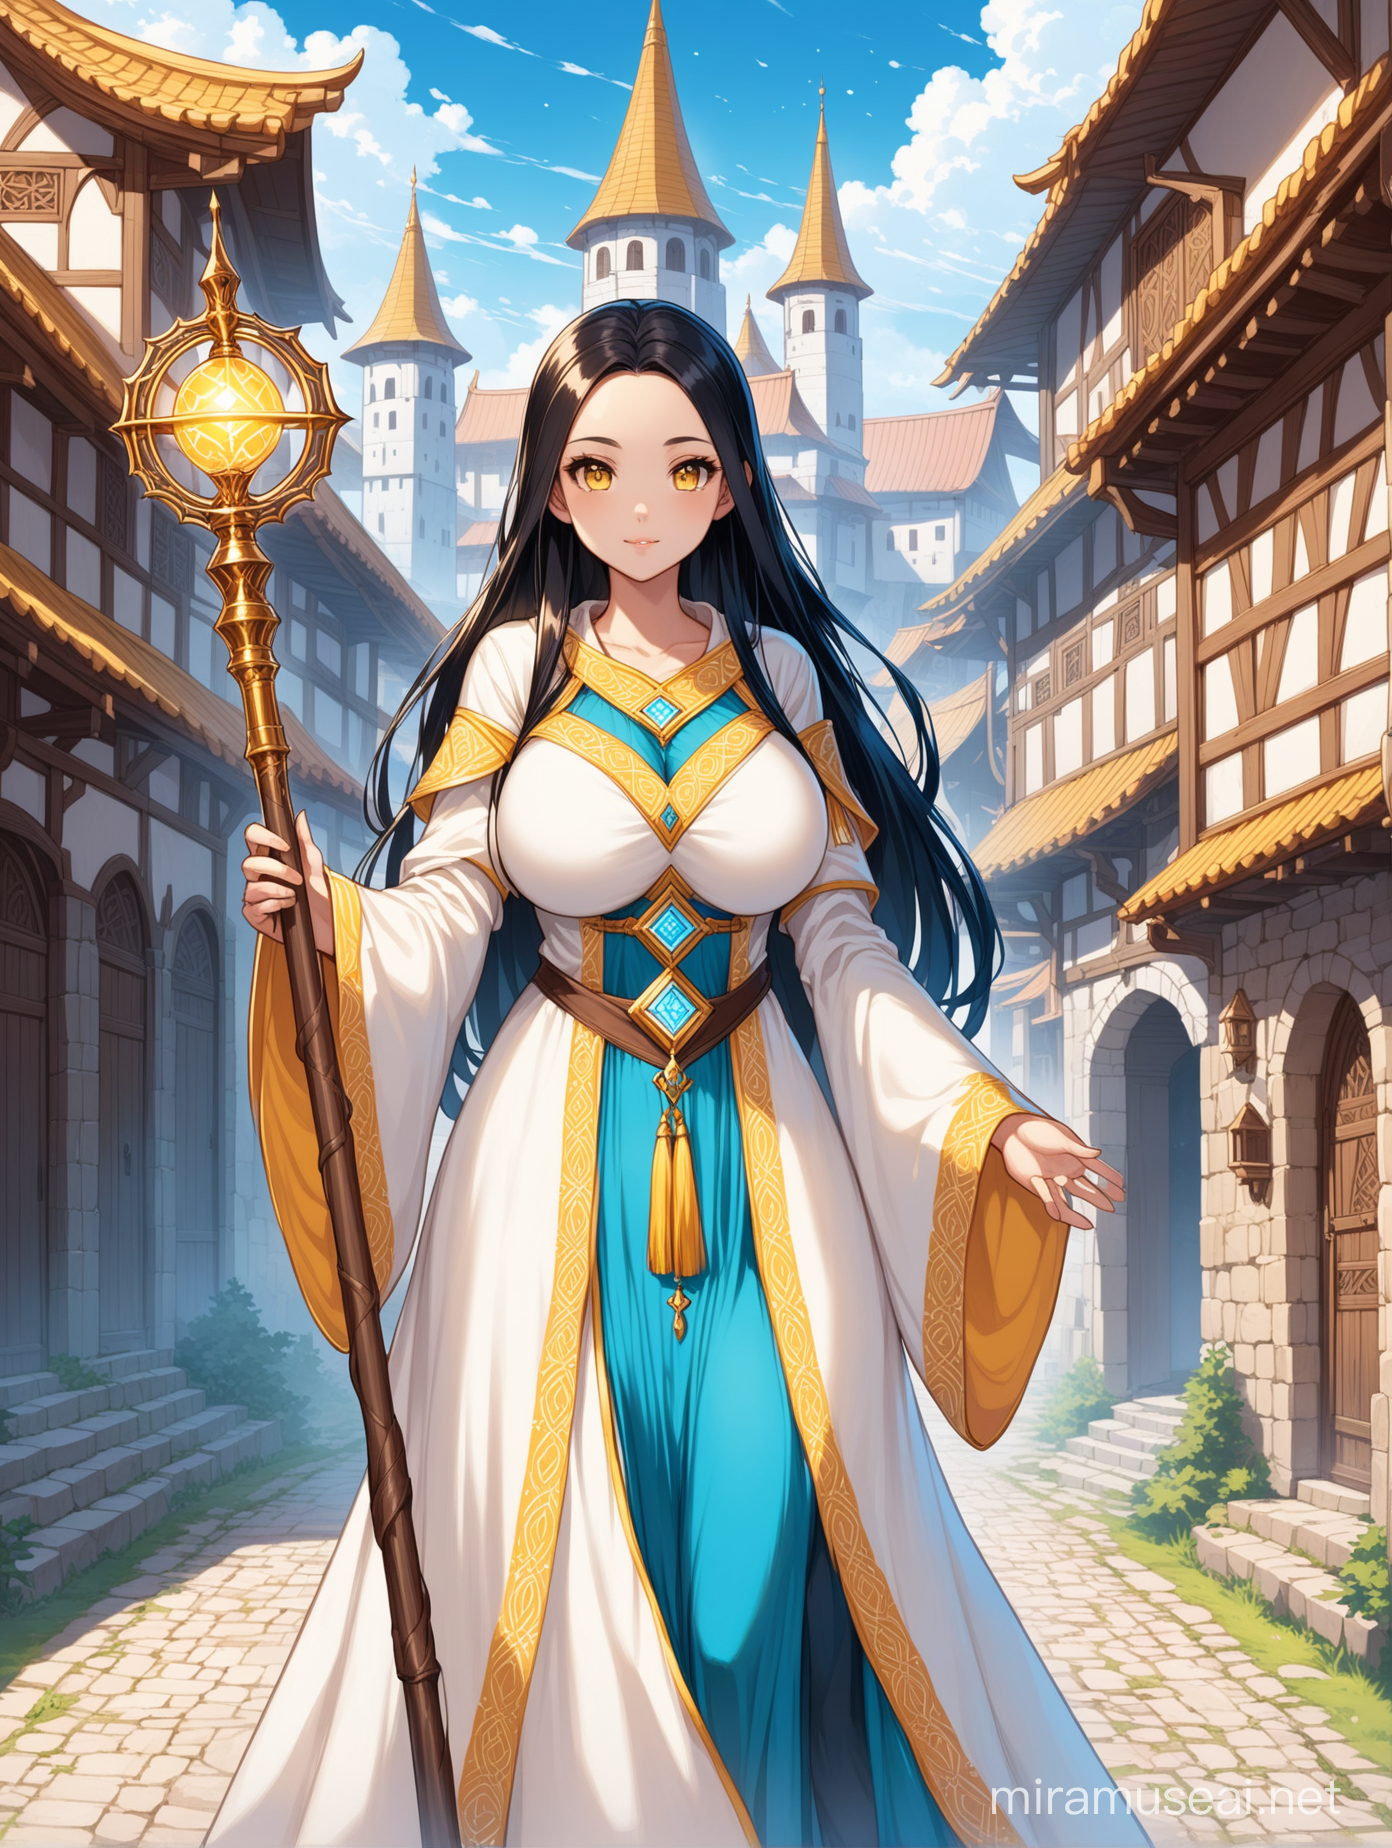 Character design, woman, narrow eyes, big breast size, straightened medium long black hair, side partitioned hair, big forehead , neutral light skin, square face, wearing a white fantasy rpg style priestess robe with blue and yellow intricate design, holding a magic staff, fantasy town background 